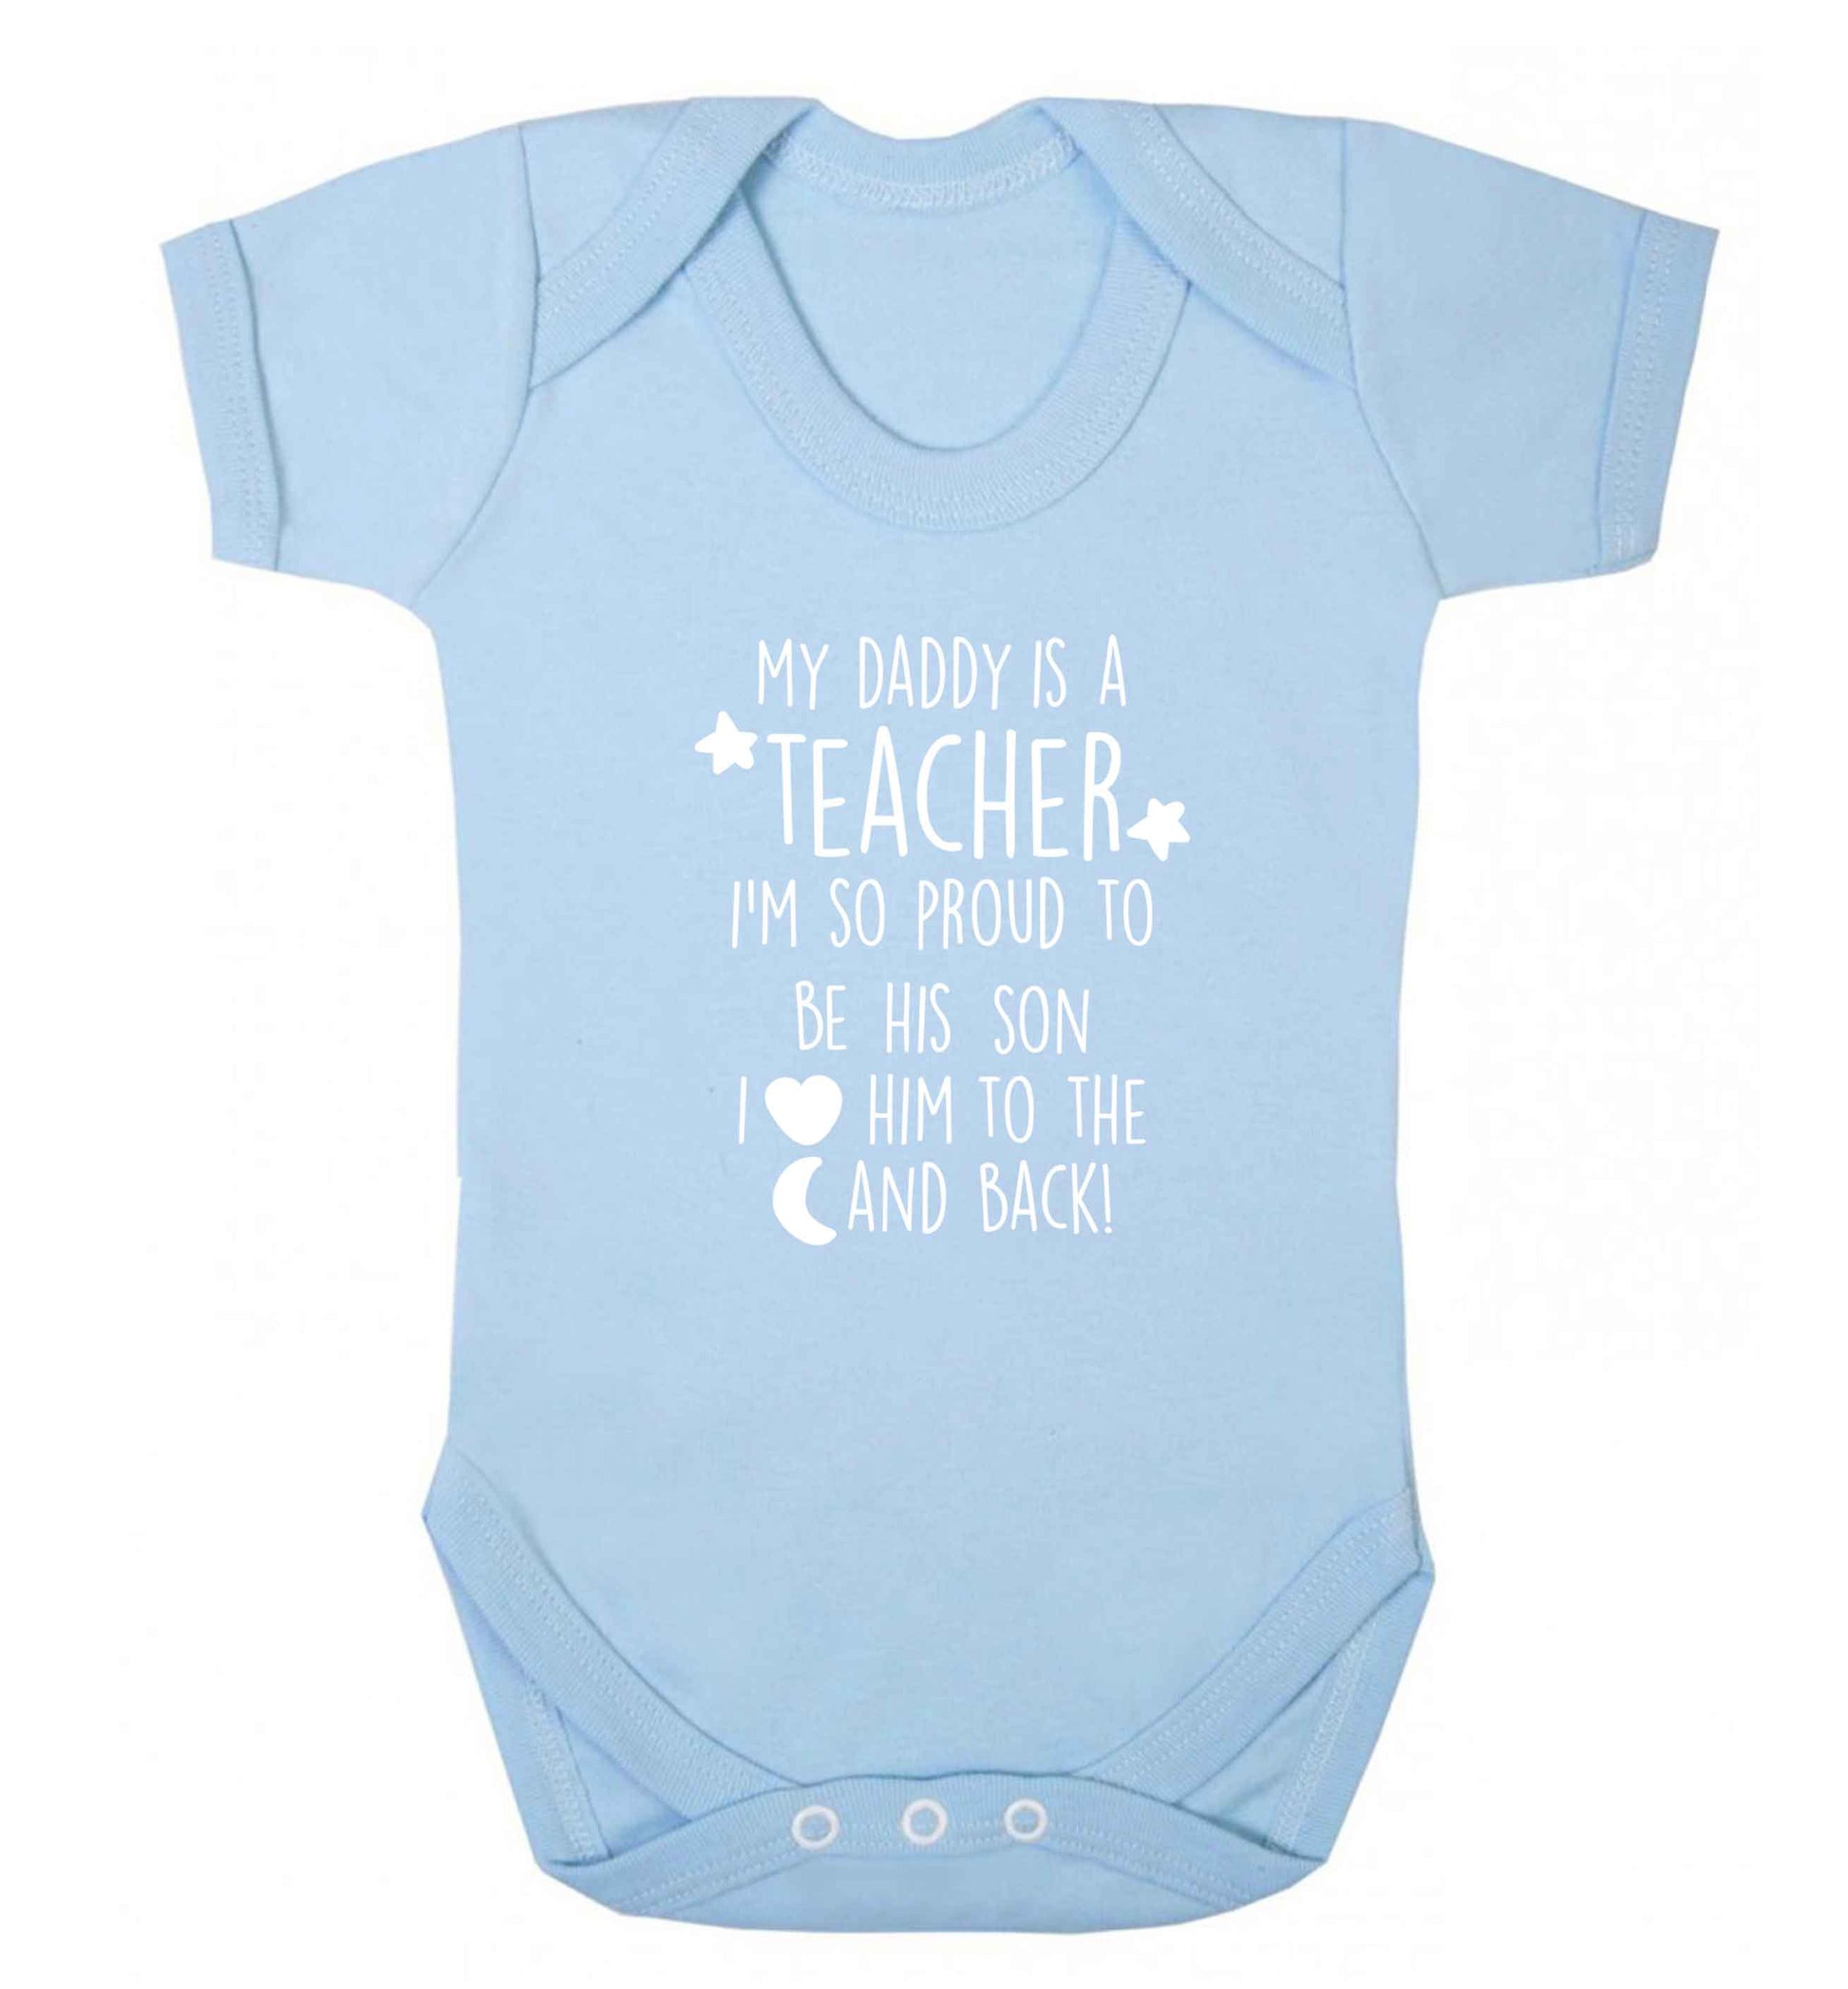 My daddy is a teacher I'm so proud to be his son I love her to the moon and back baby vest pale blue 18-24 months